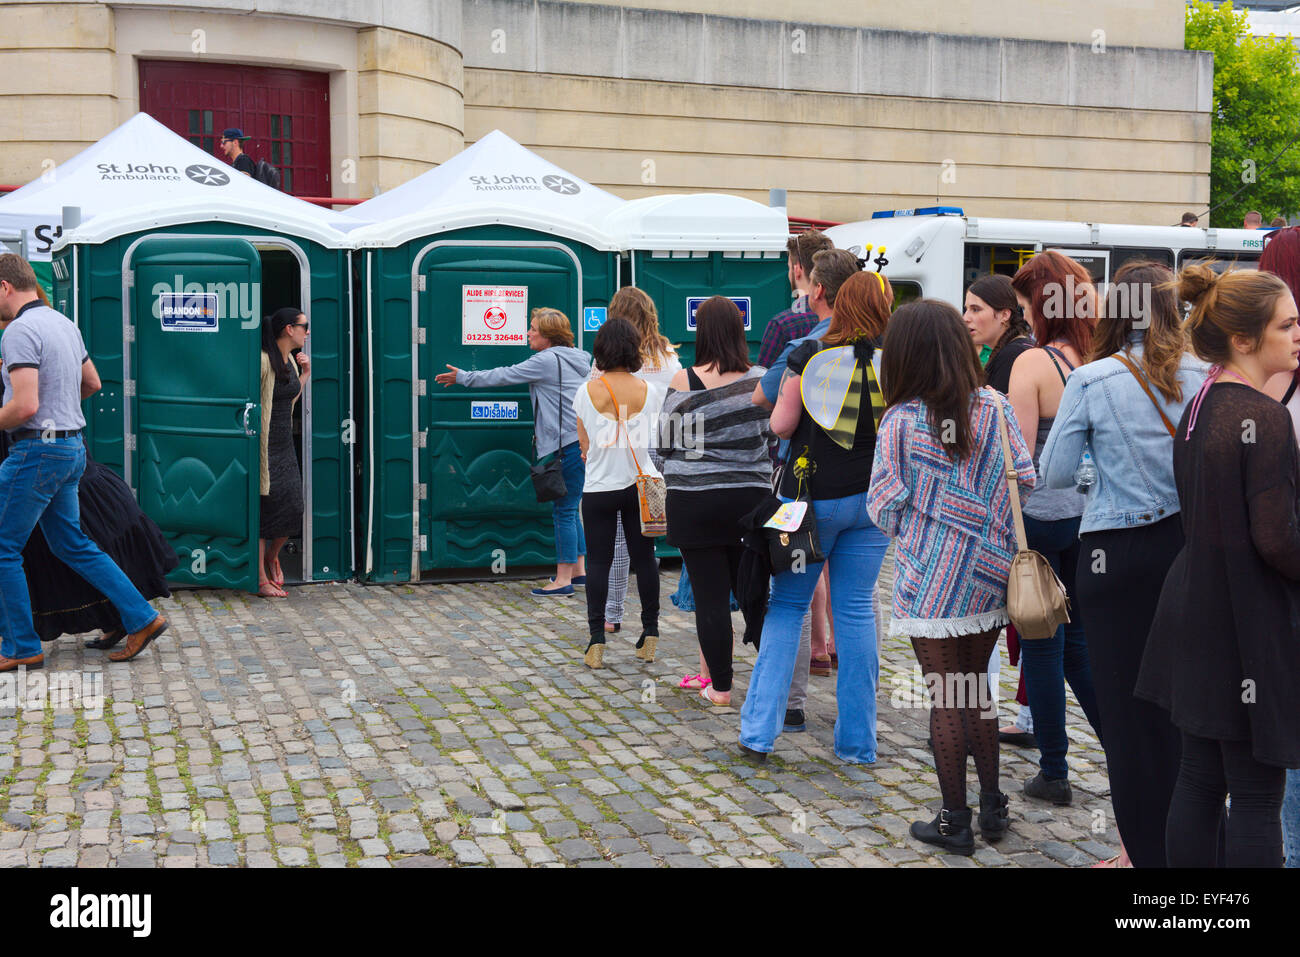 Queue at portable toilets during festival Stock Photo